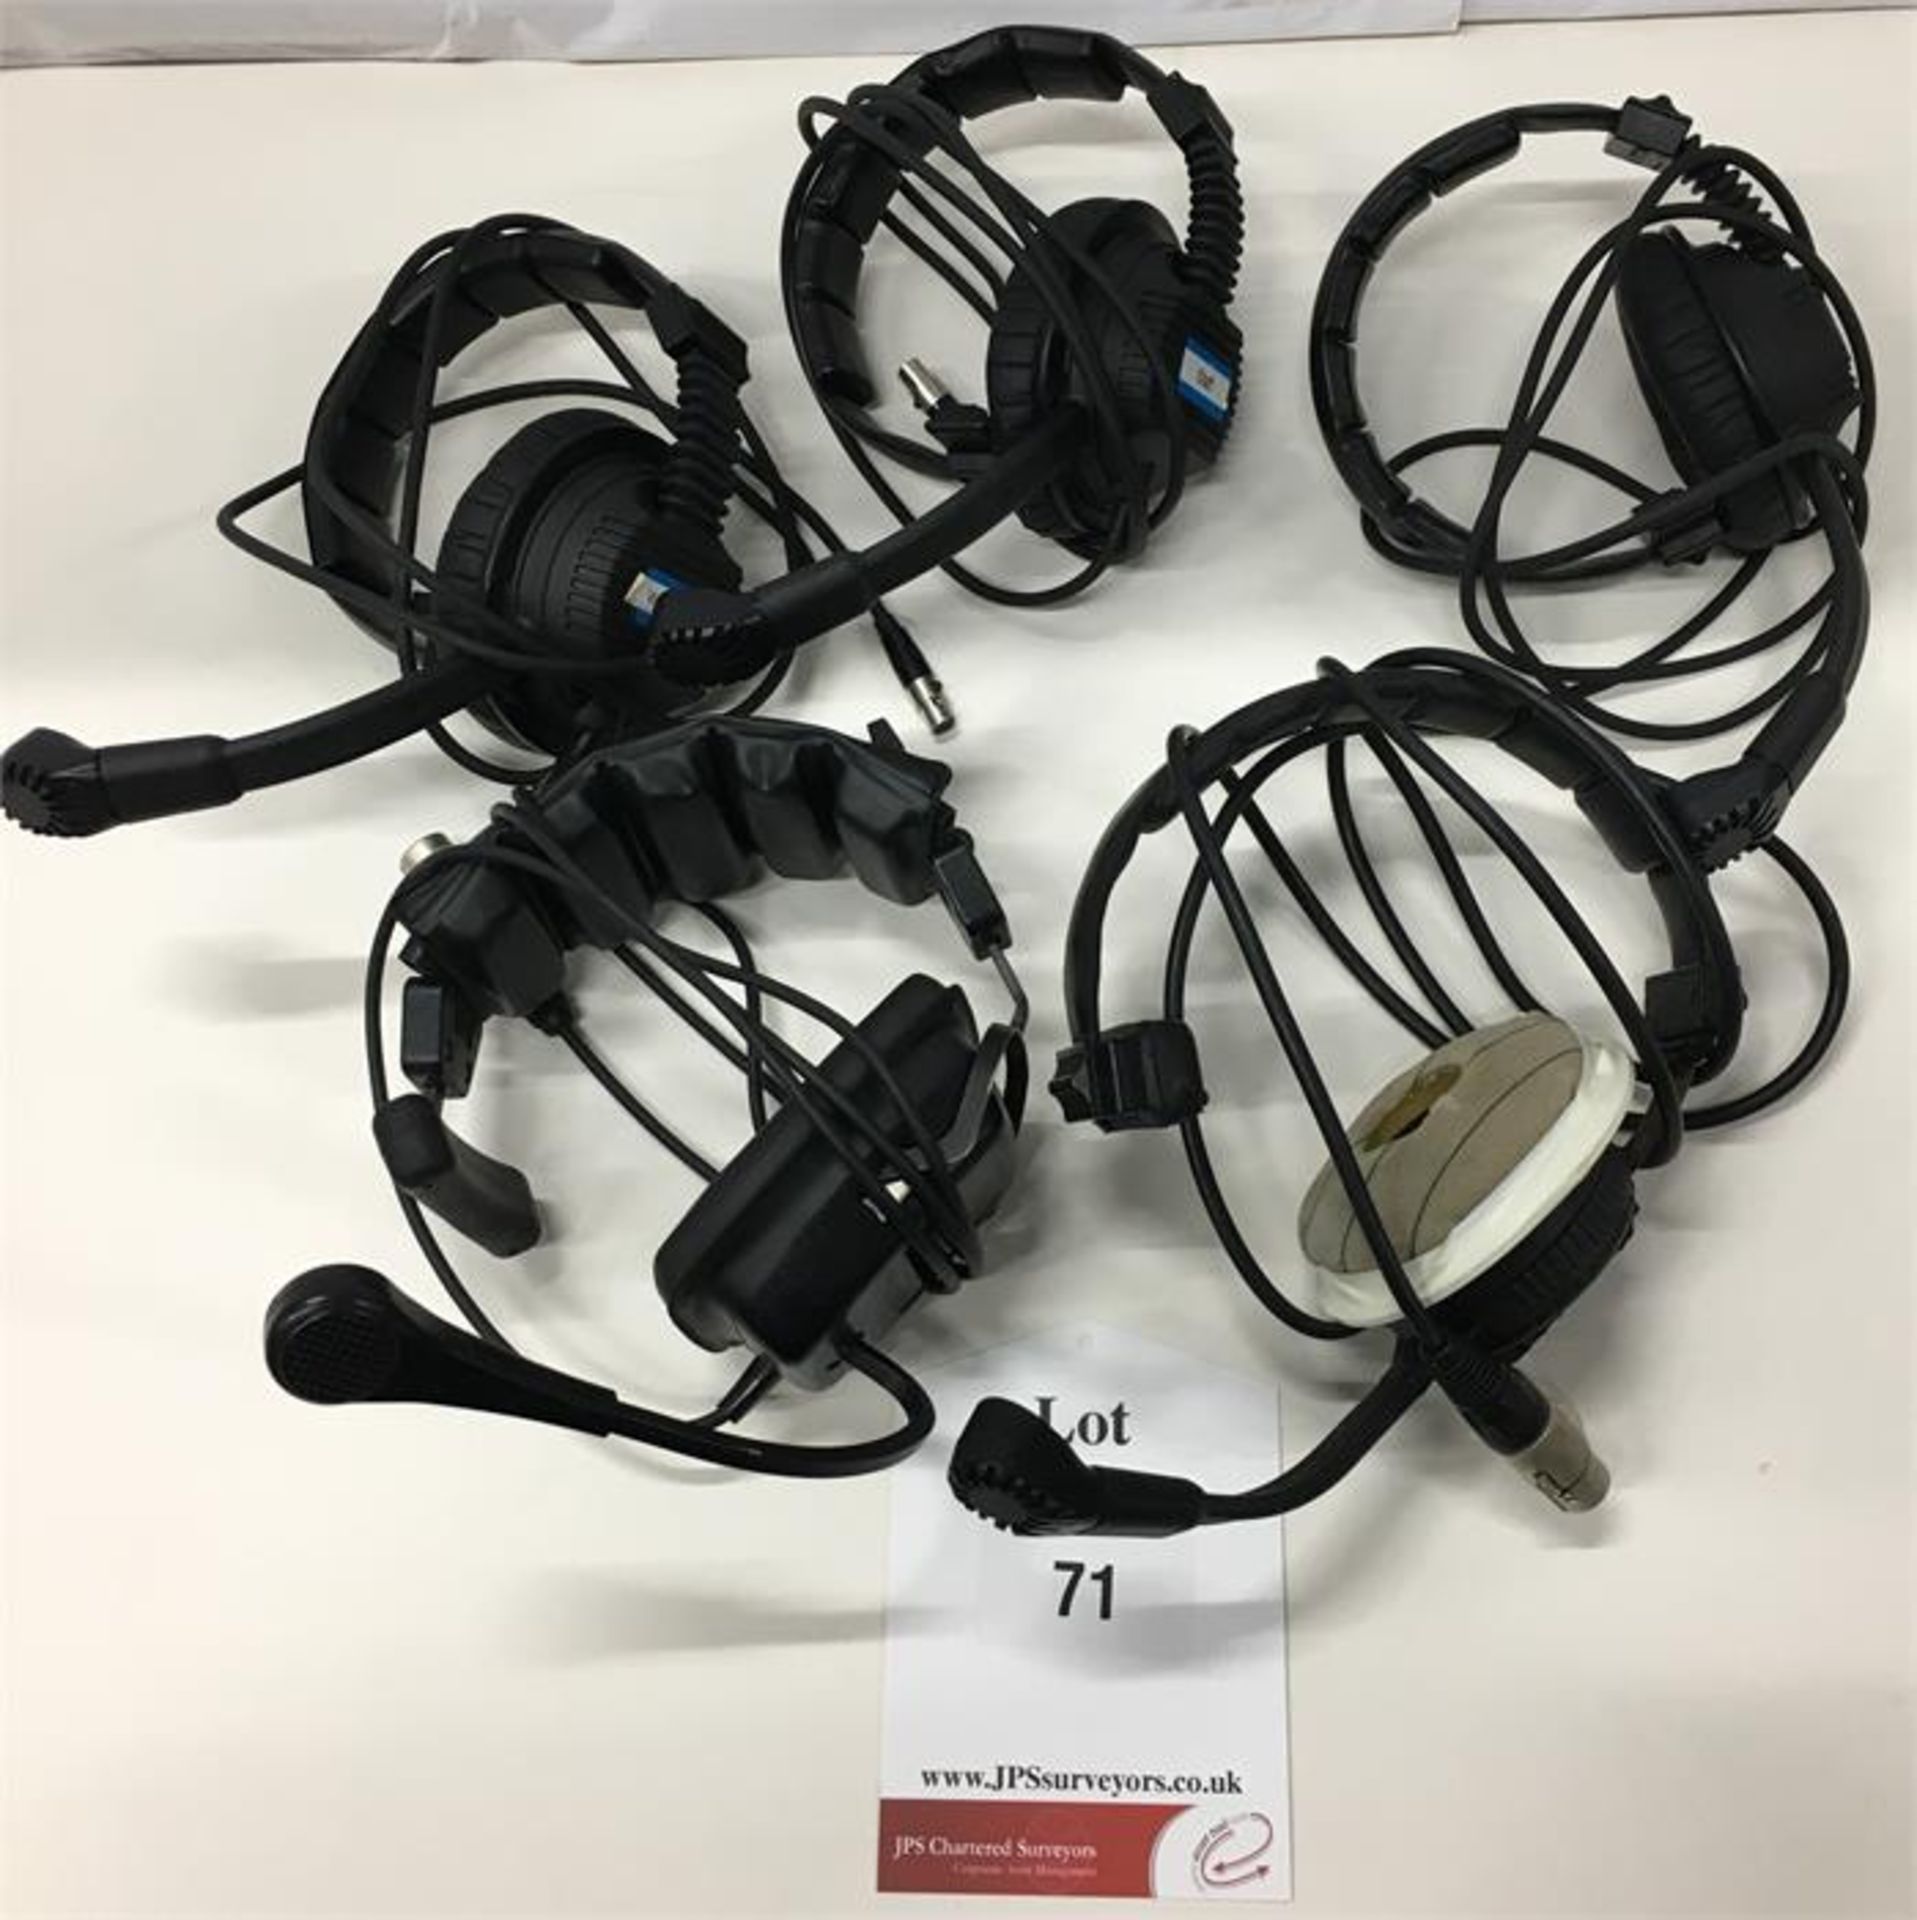 5 x Headsets with microphones incl: Altair, Canford and Telex, see description for further details